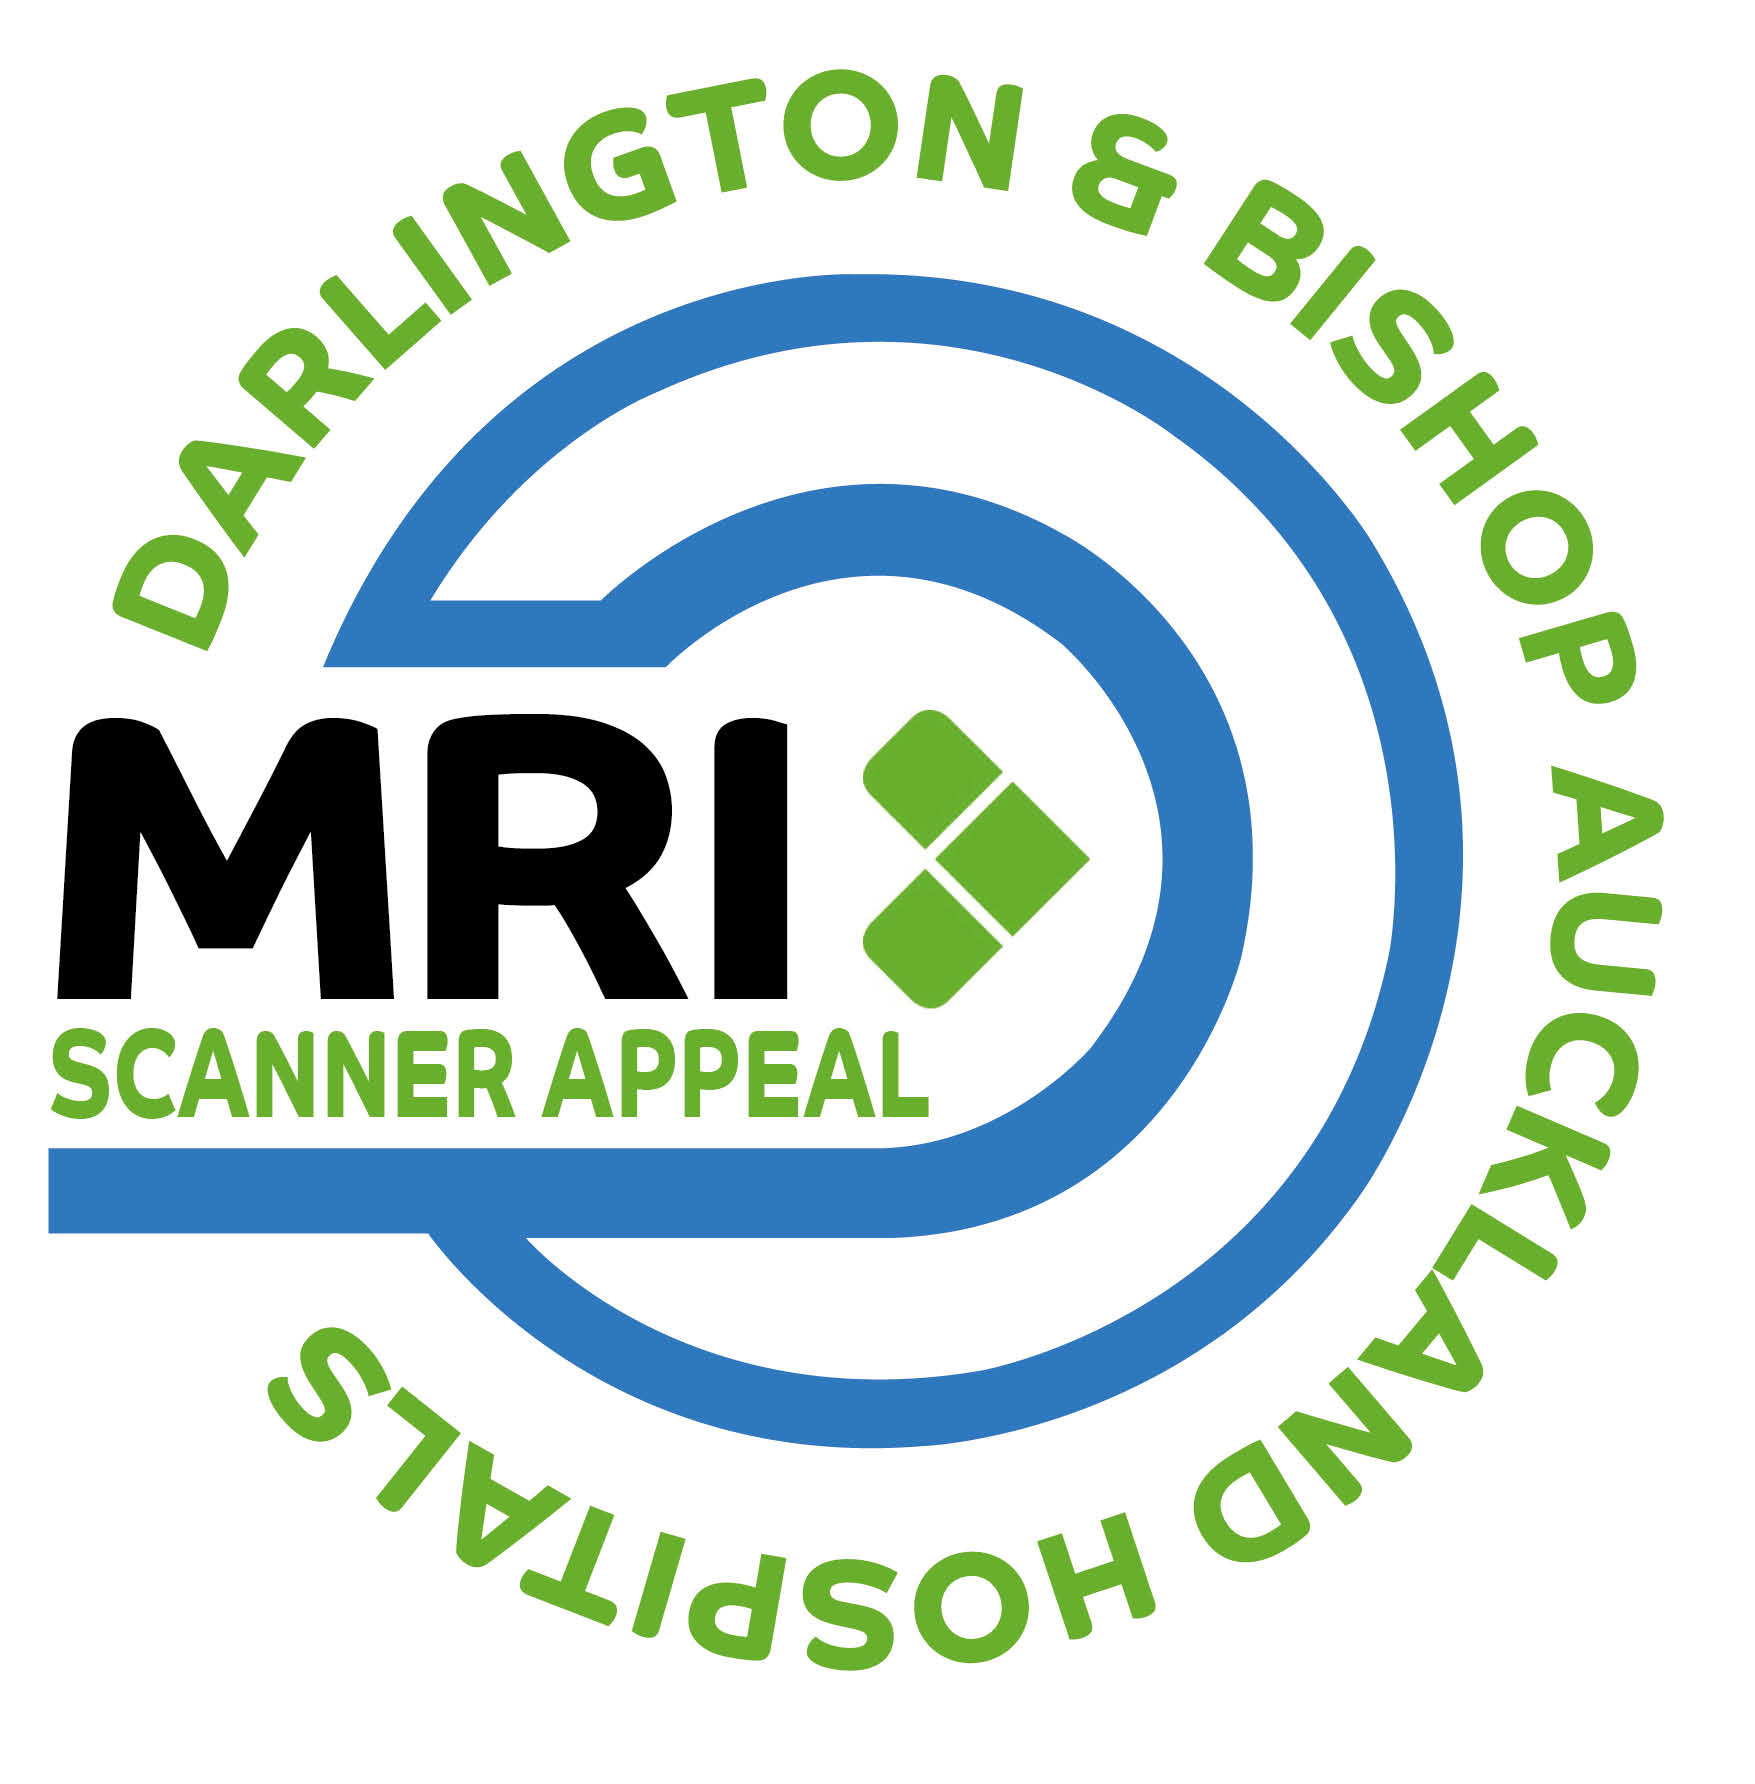 Donations Roll in for MRI Scanner Appeal